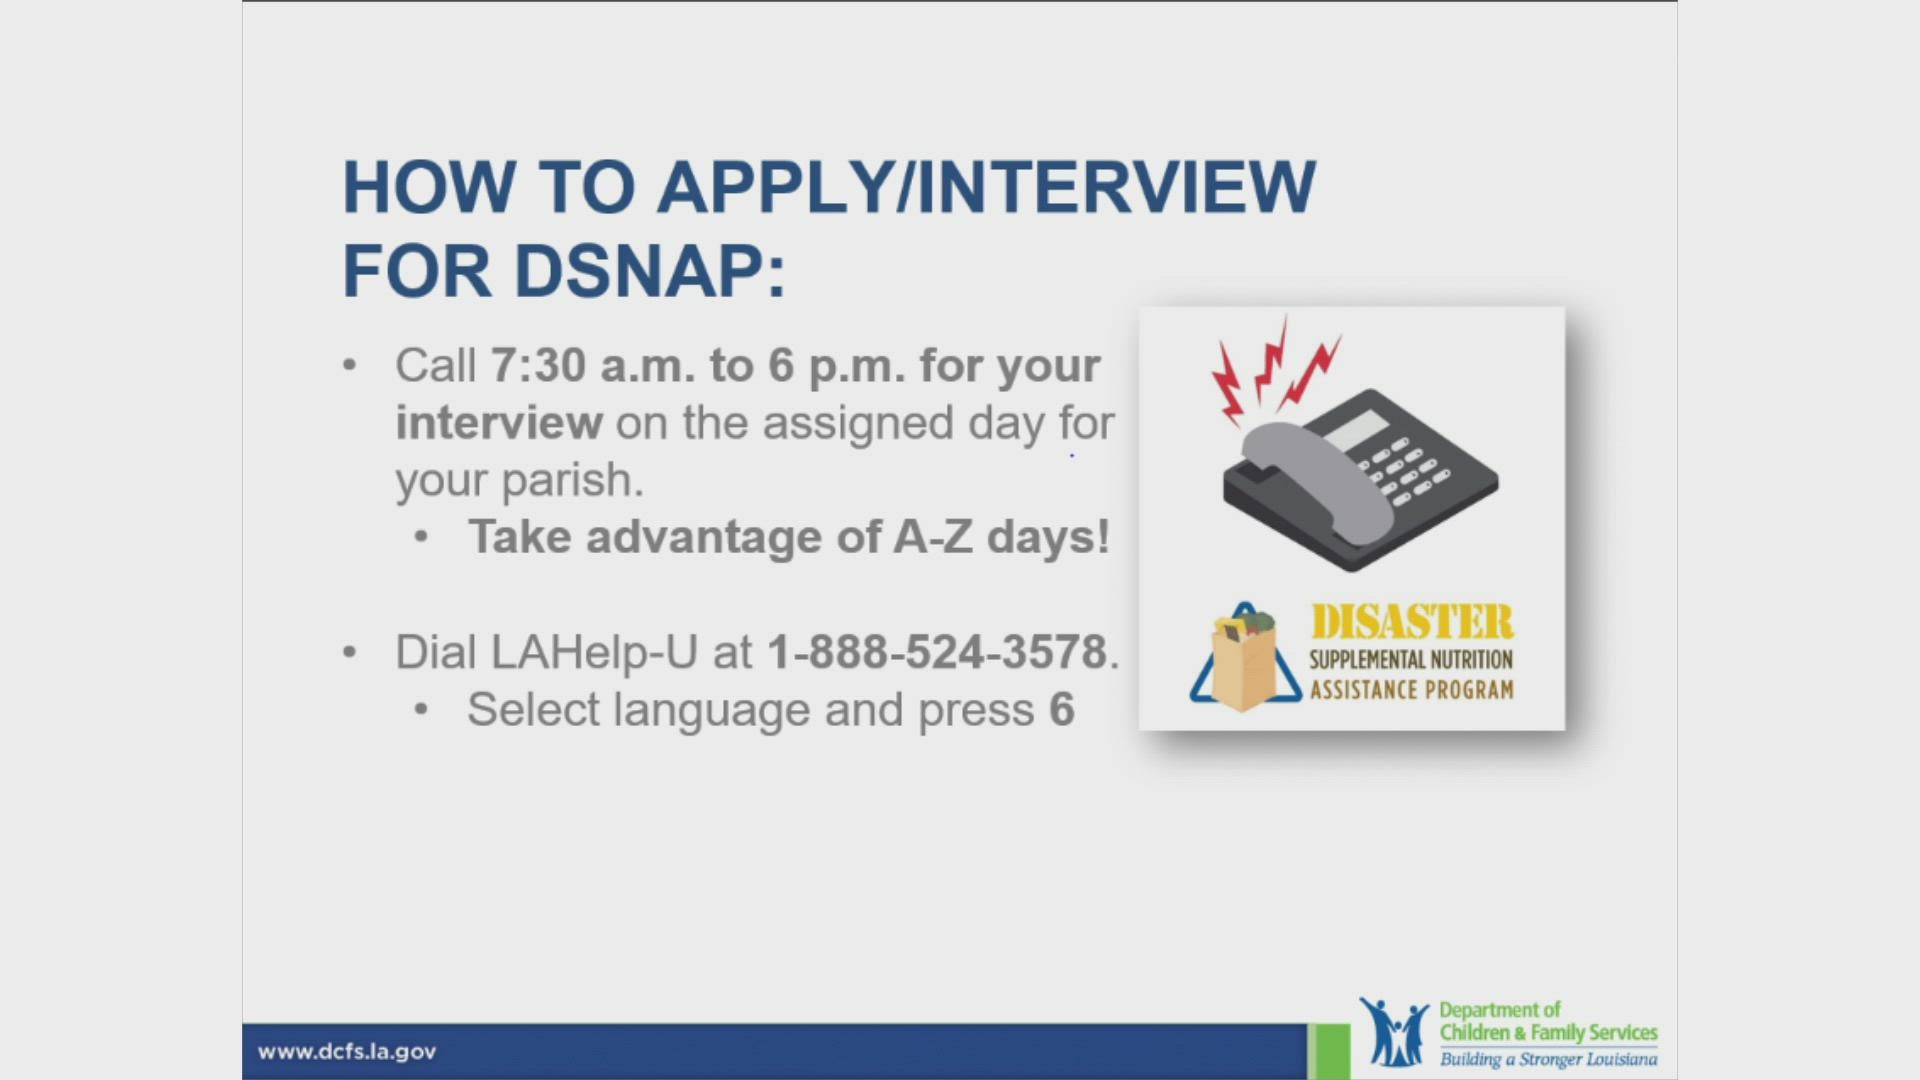 Preregistering for DSNAP online and signing up for the LA Wallet will speed up the application process. Residents of 25 Louisiana parishes are eligible the help.